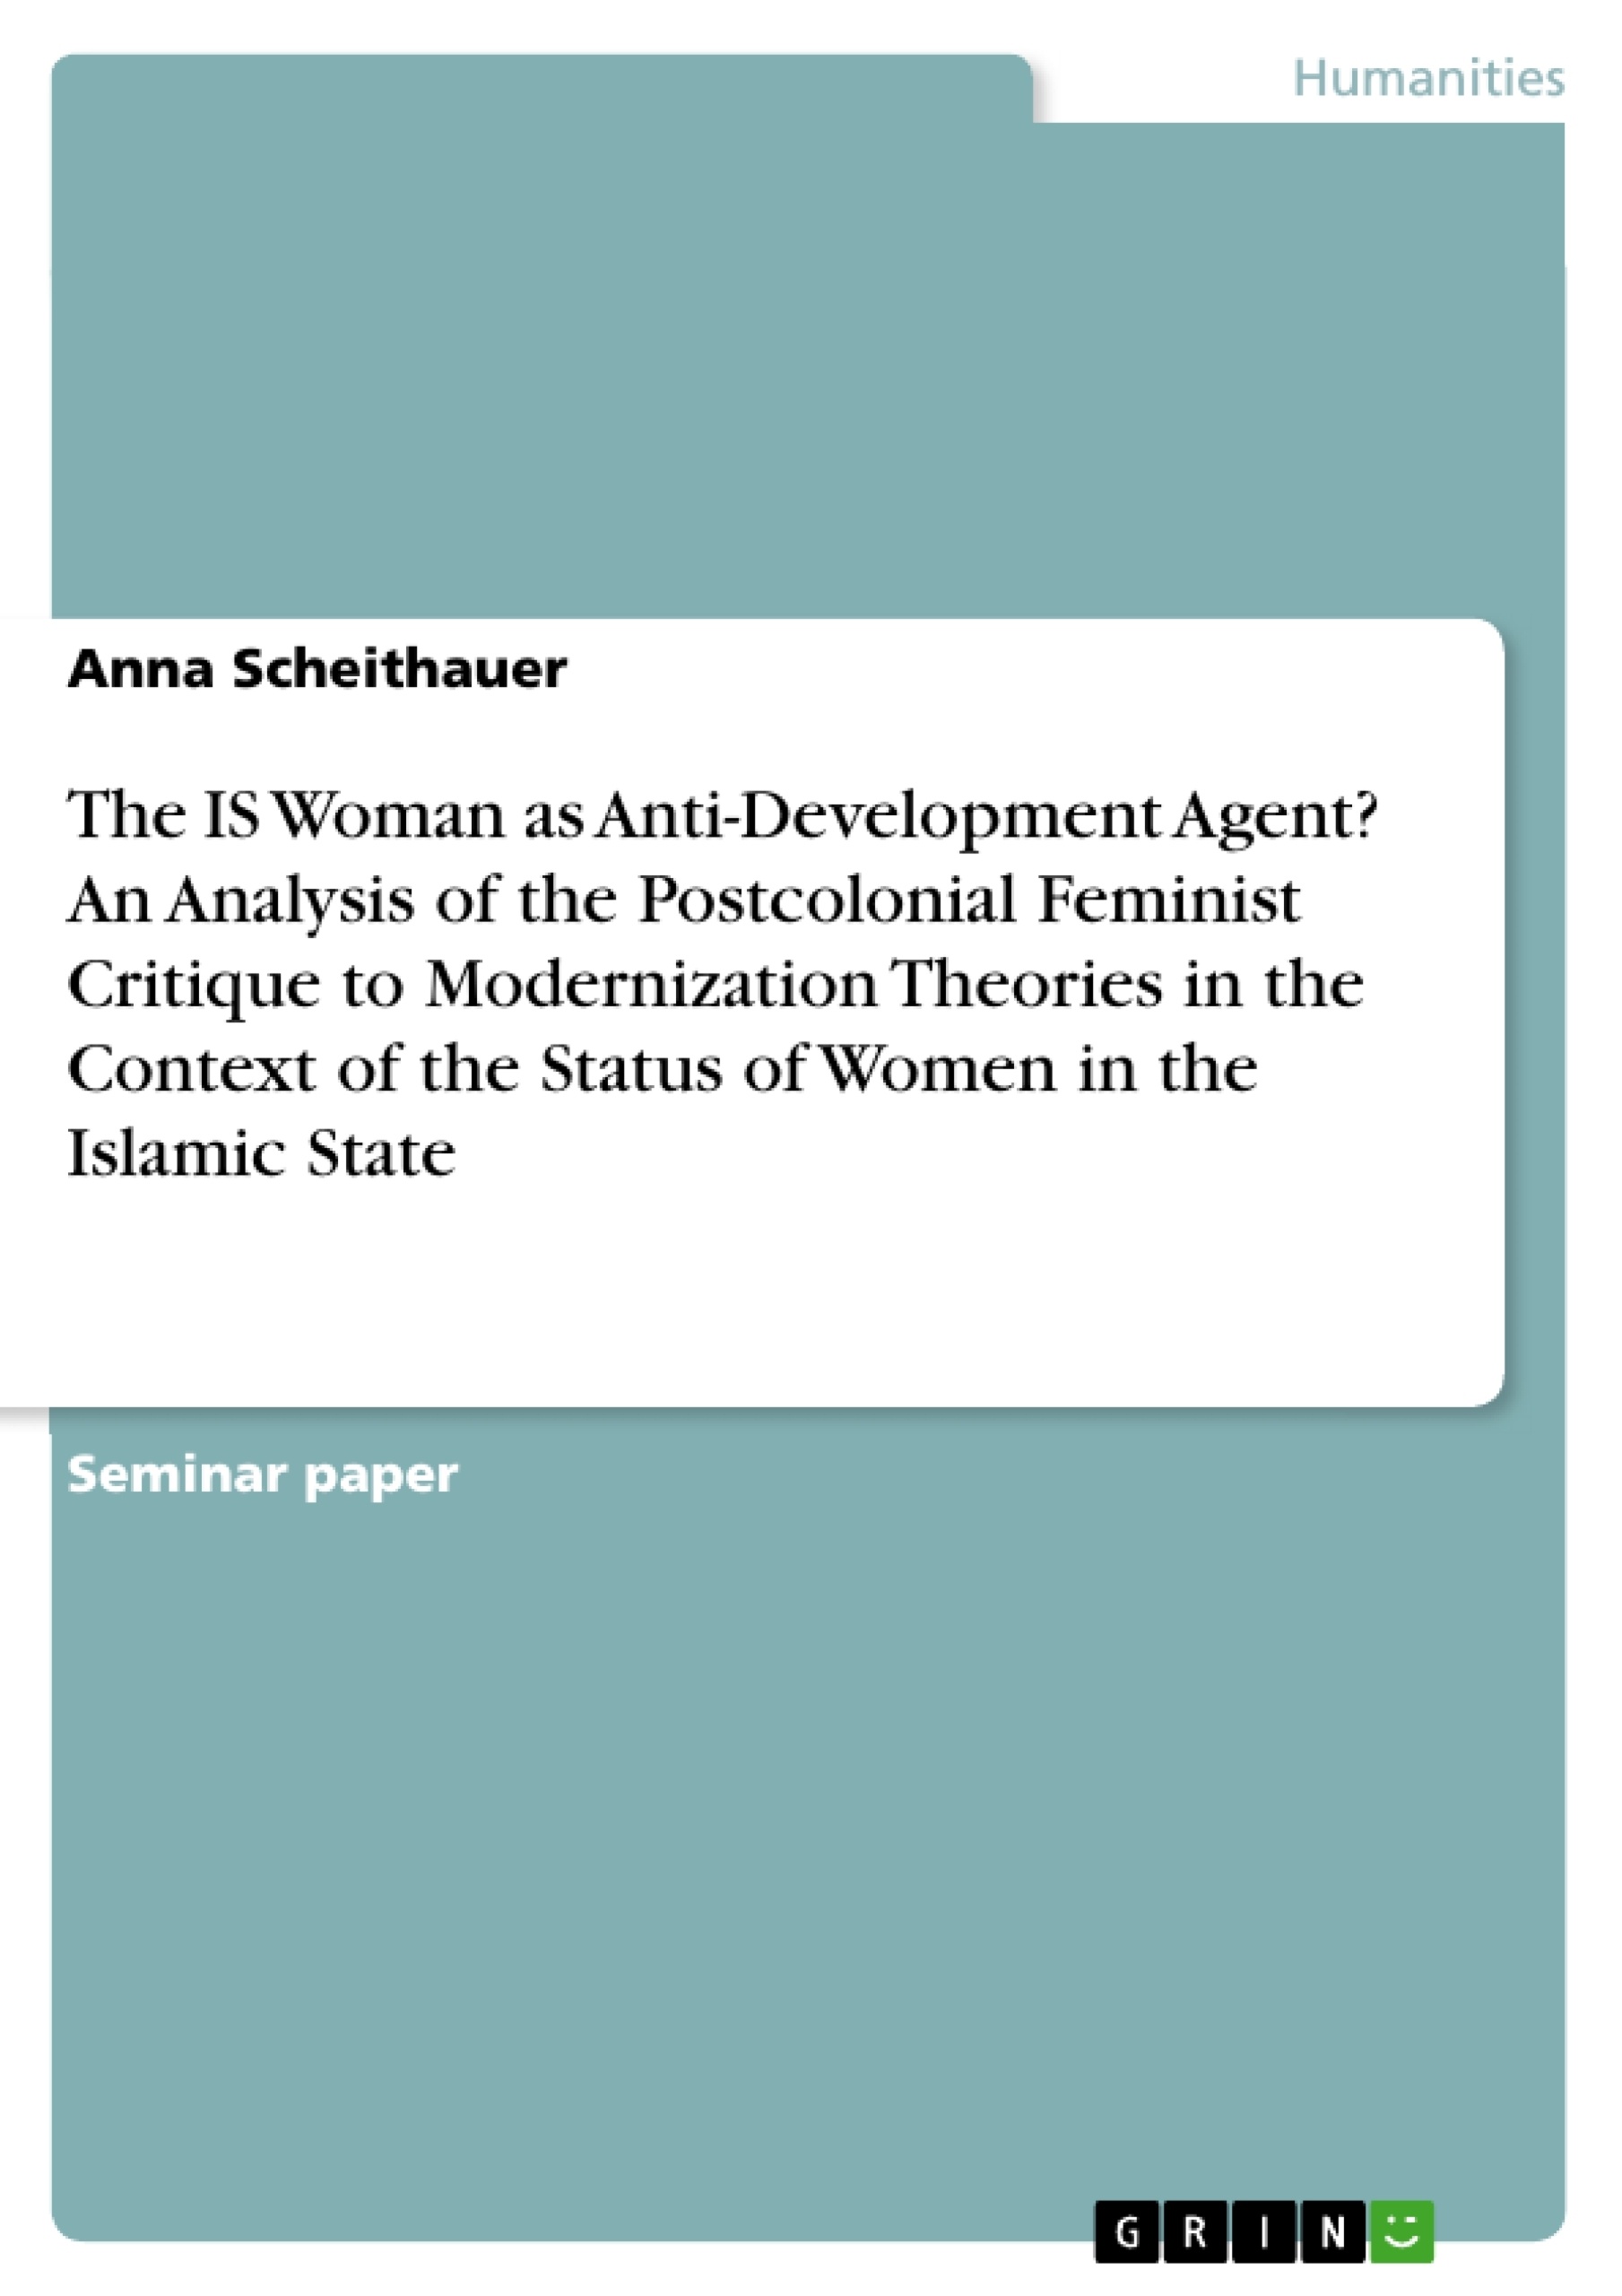 Title: The IS Woman as Anti-Development Agent? An Analysis of the Postcolonial Feminist Critique to Modernization Theories in the Context of the Status of Women in the Islamic State